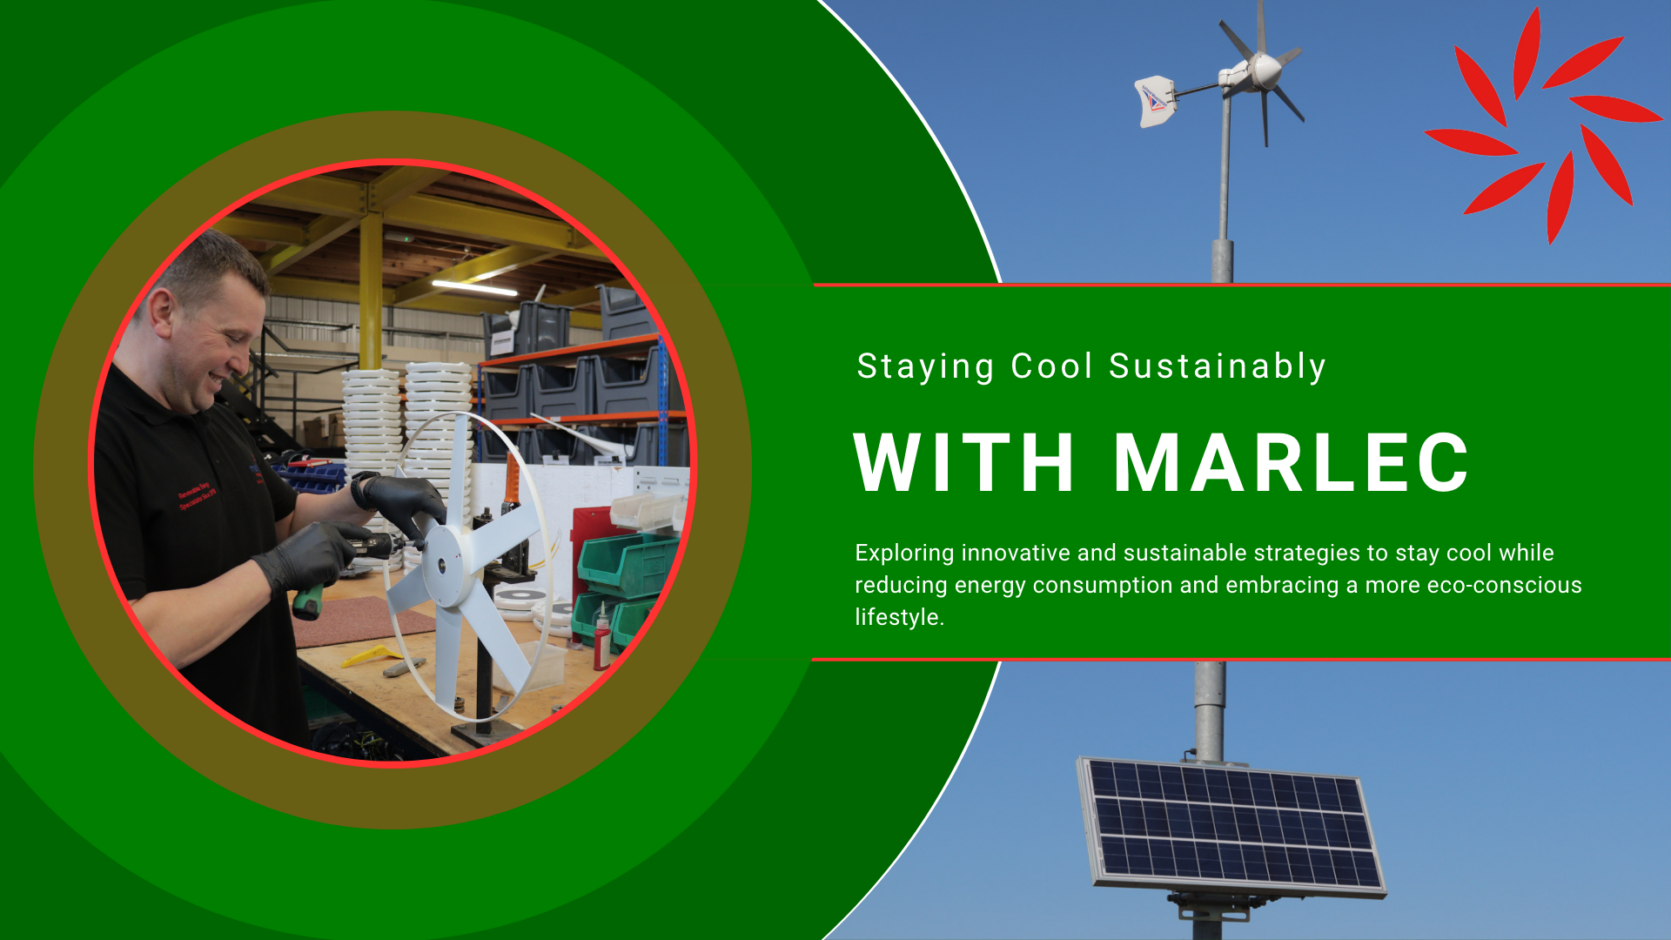 Marlec Banner featuring an image of a solar/ wind hybrid energy system and a team member working on some turbine blades.